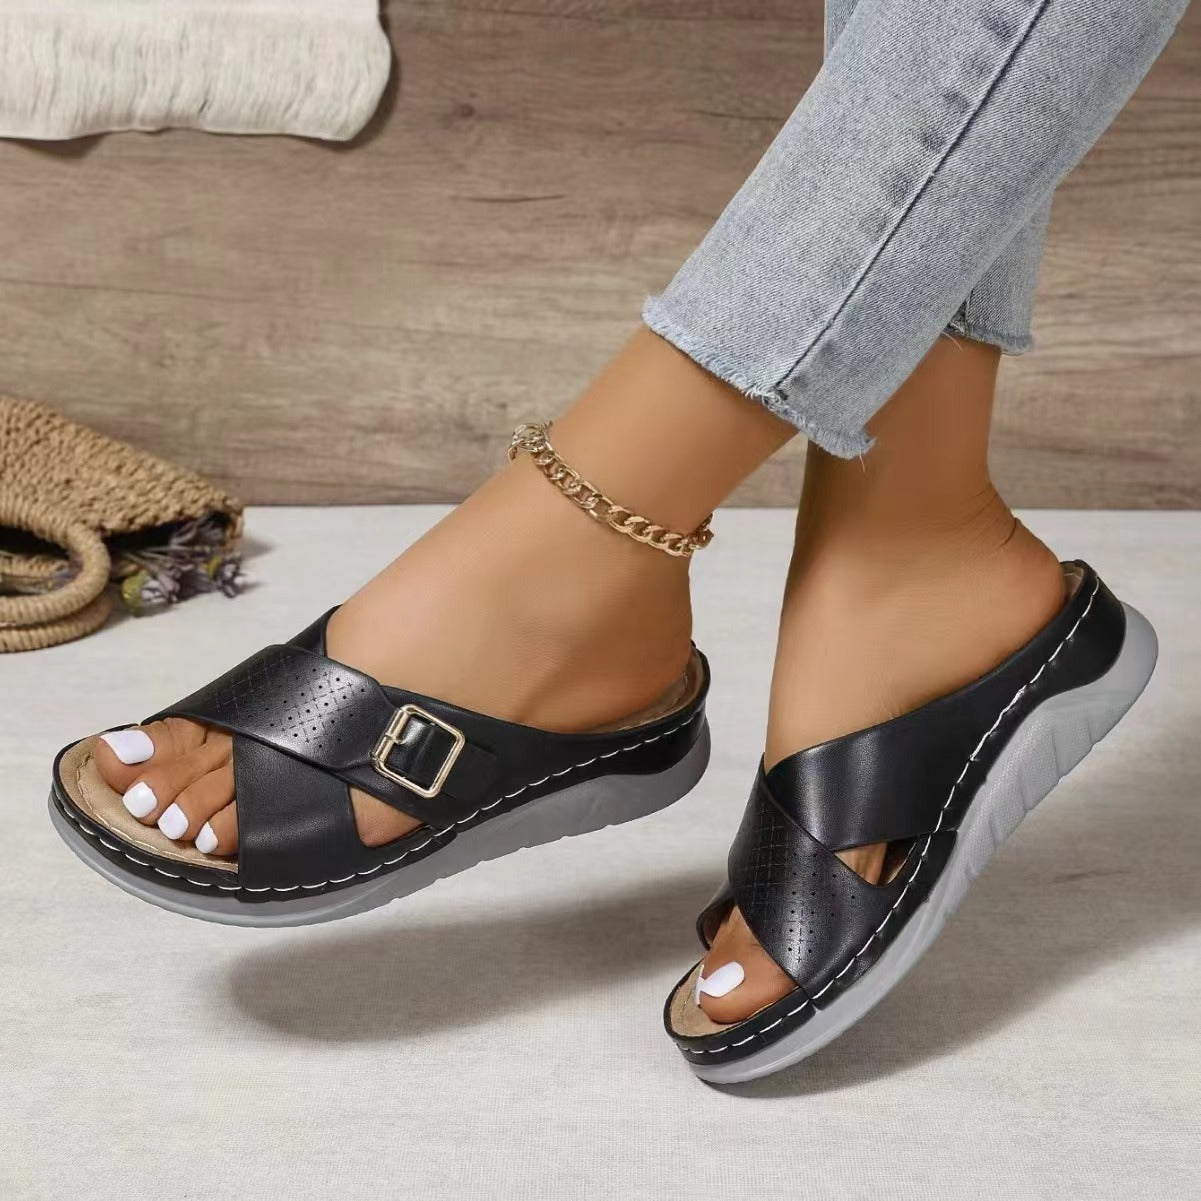 New Buckle Cross-design Slippers Summer Wedges Sandals Fashion Women's Beach Shoes